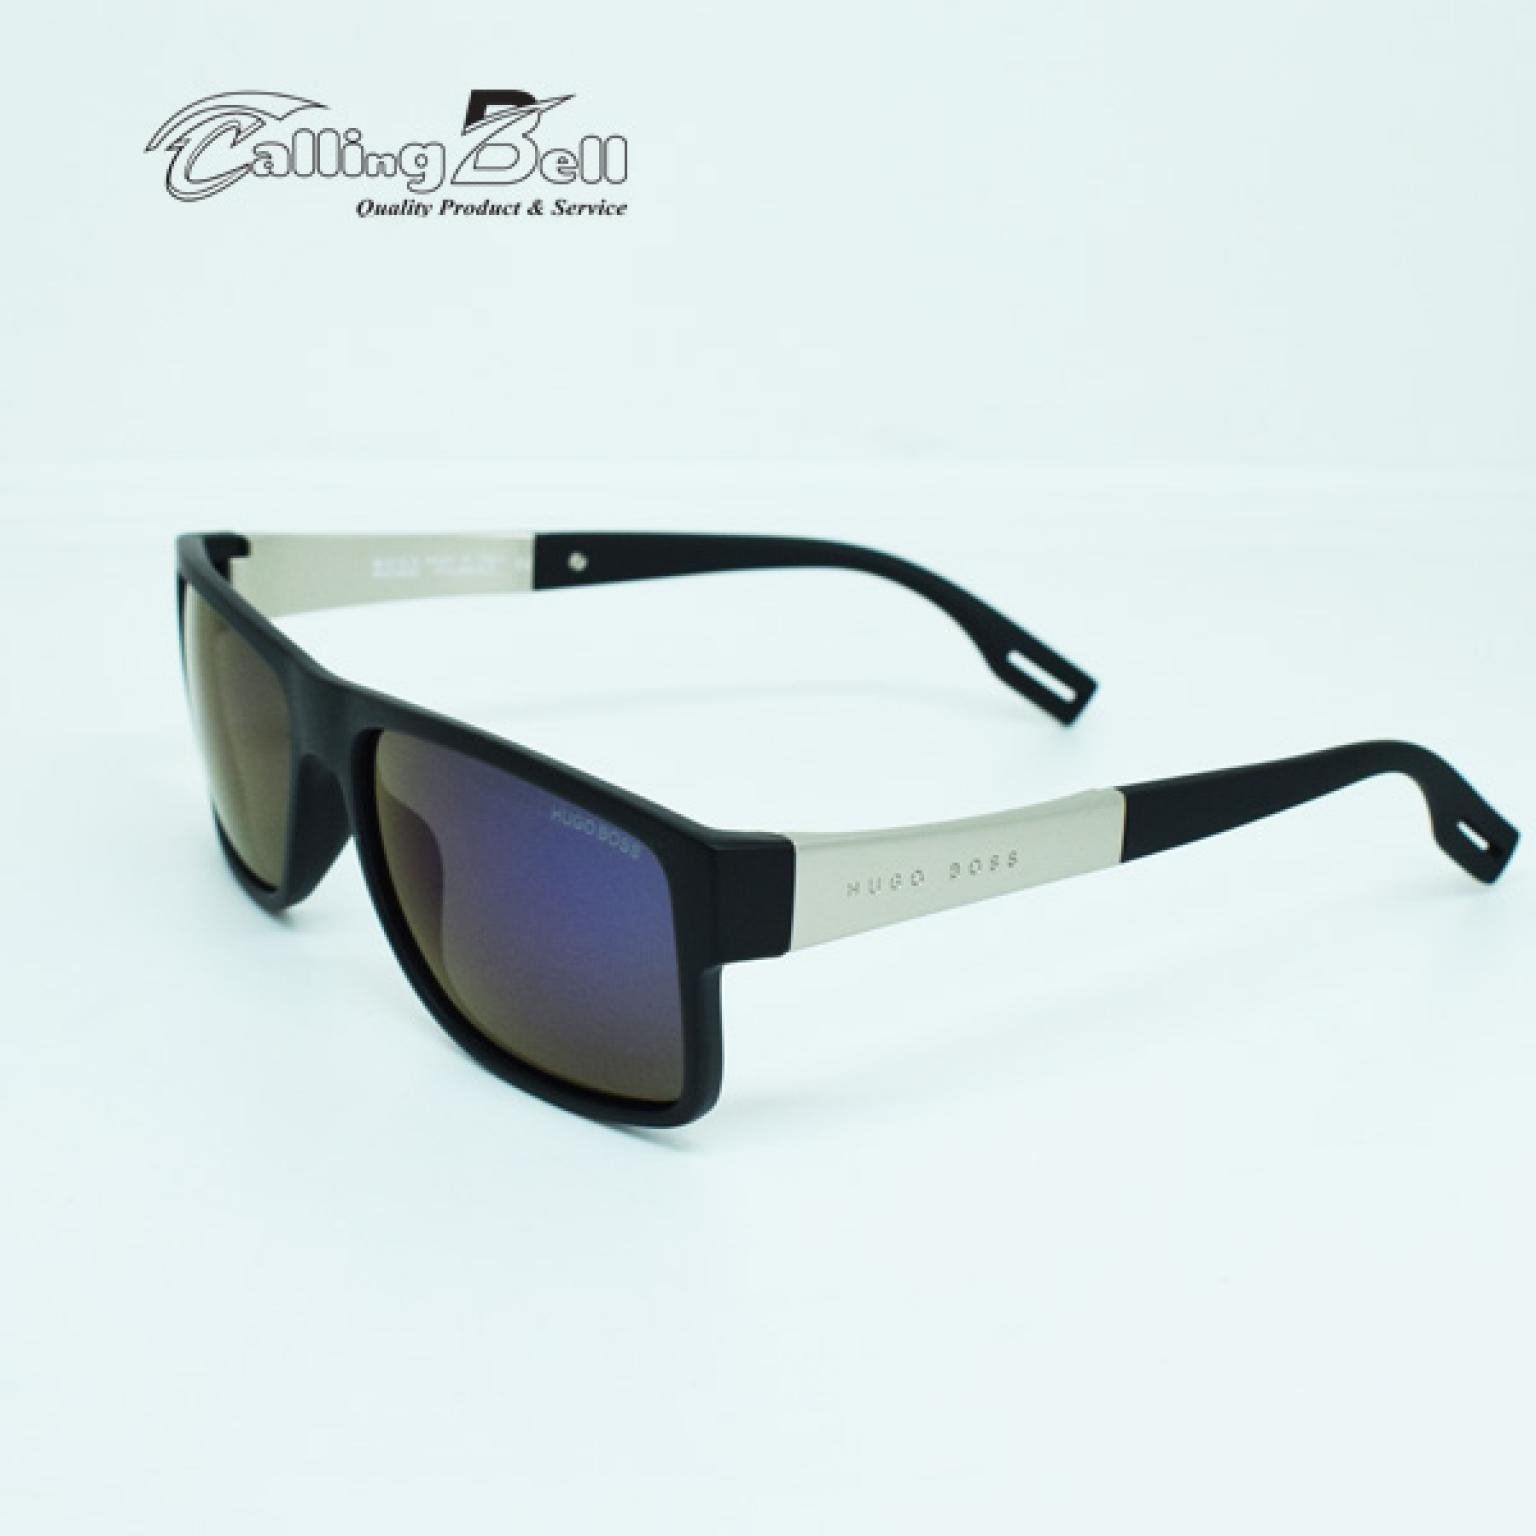 Premium Quality Polarized Lens With Durable Metal Body Sunglasses For Stylish Men